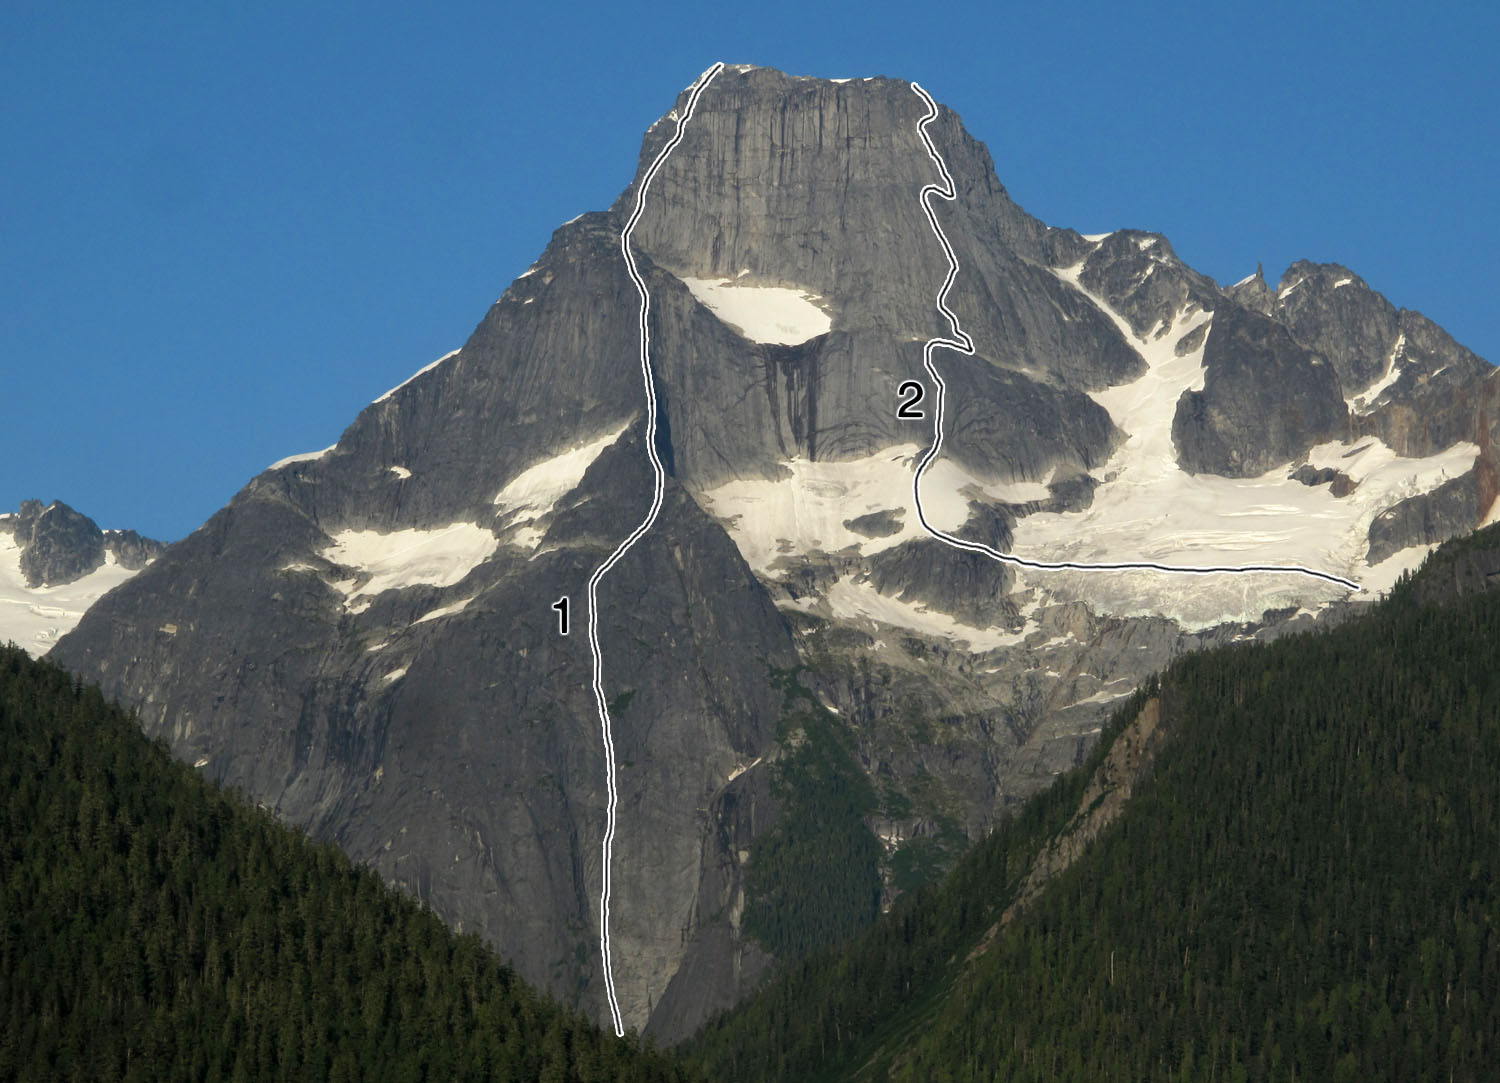 Mt. Bute, with (1) the 50-pitch School of Rock (Kay-Martinello-Sinnes, 2009), and (2) West Face (Foweraker-Serl, 1986). 